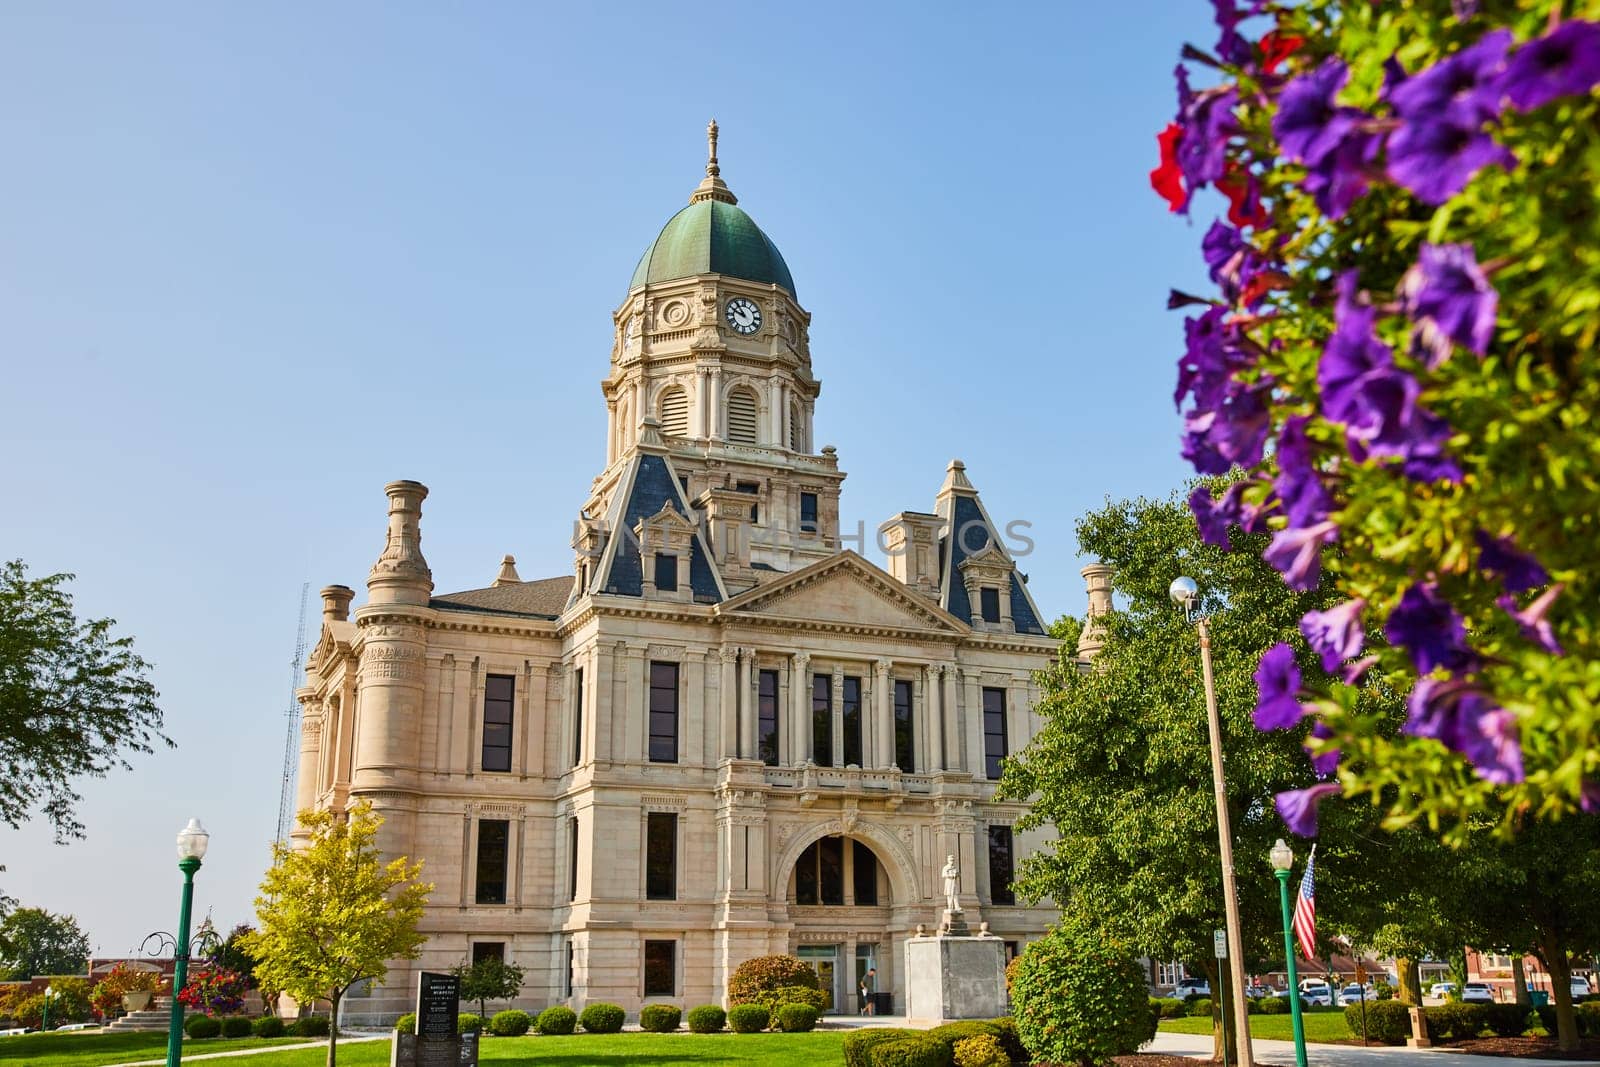 Image of Columbia city courthouse with red and purple flowers on side of shot on sunny day